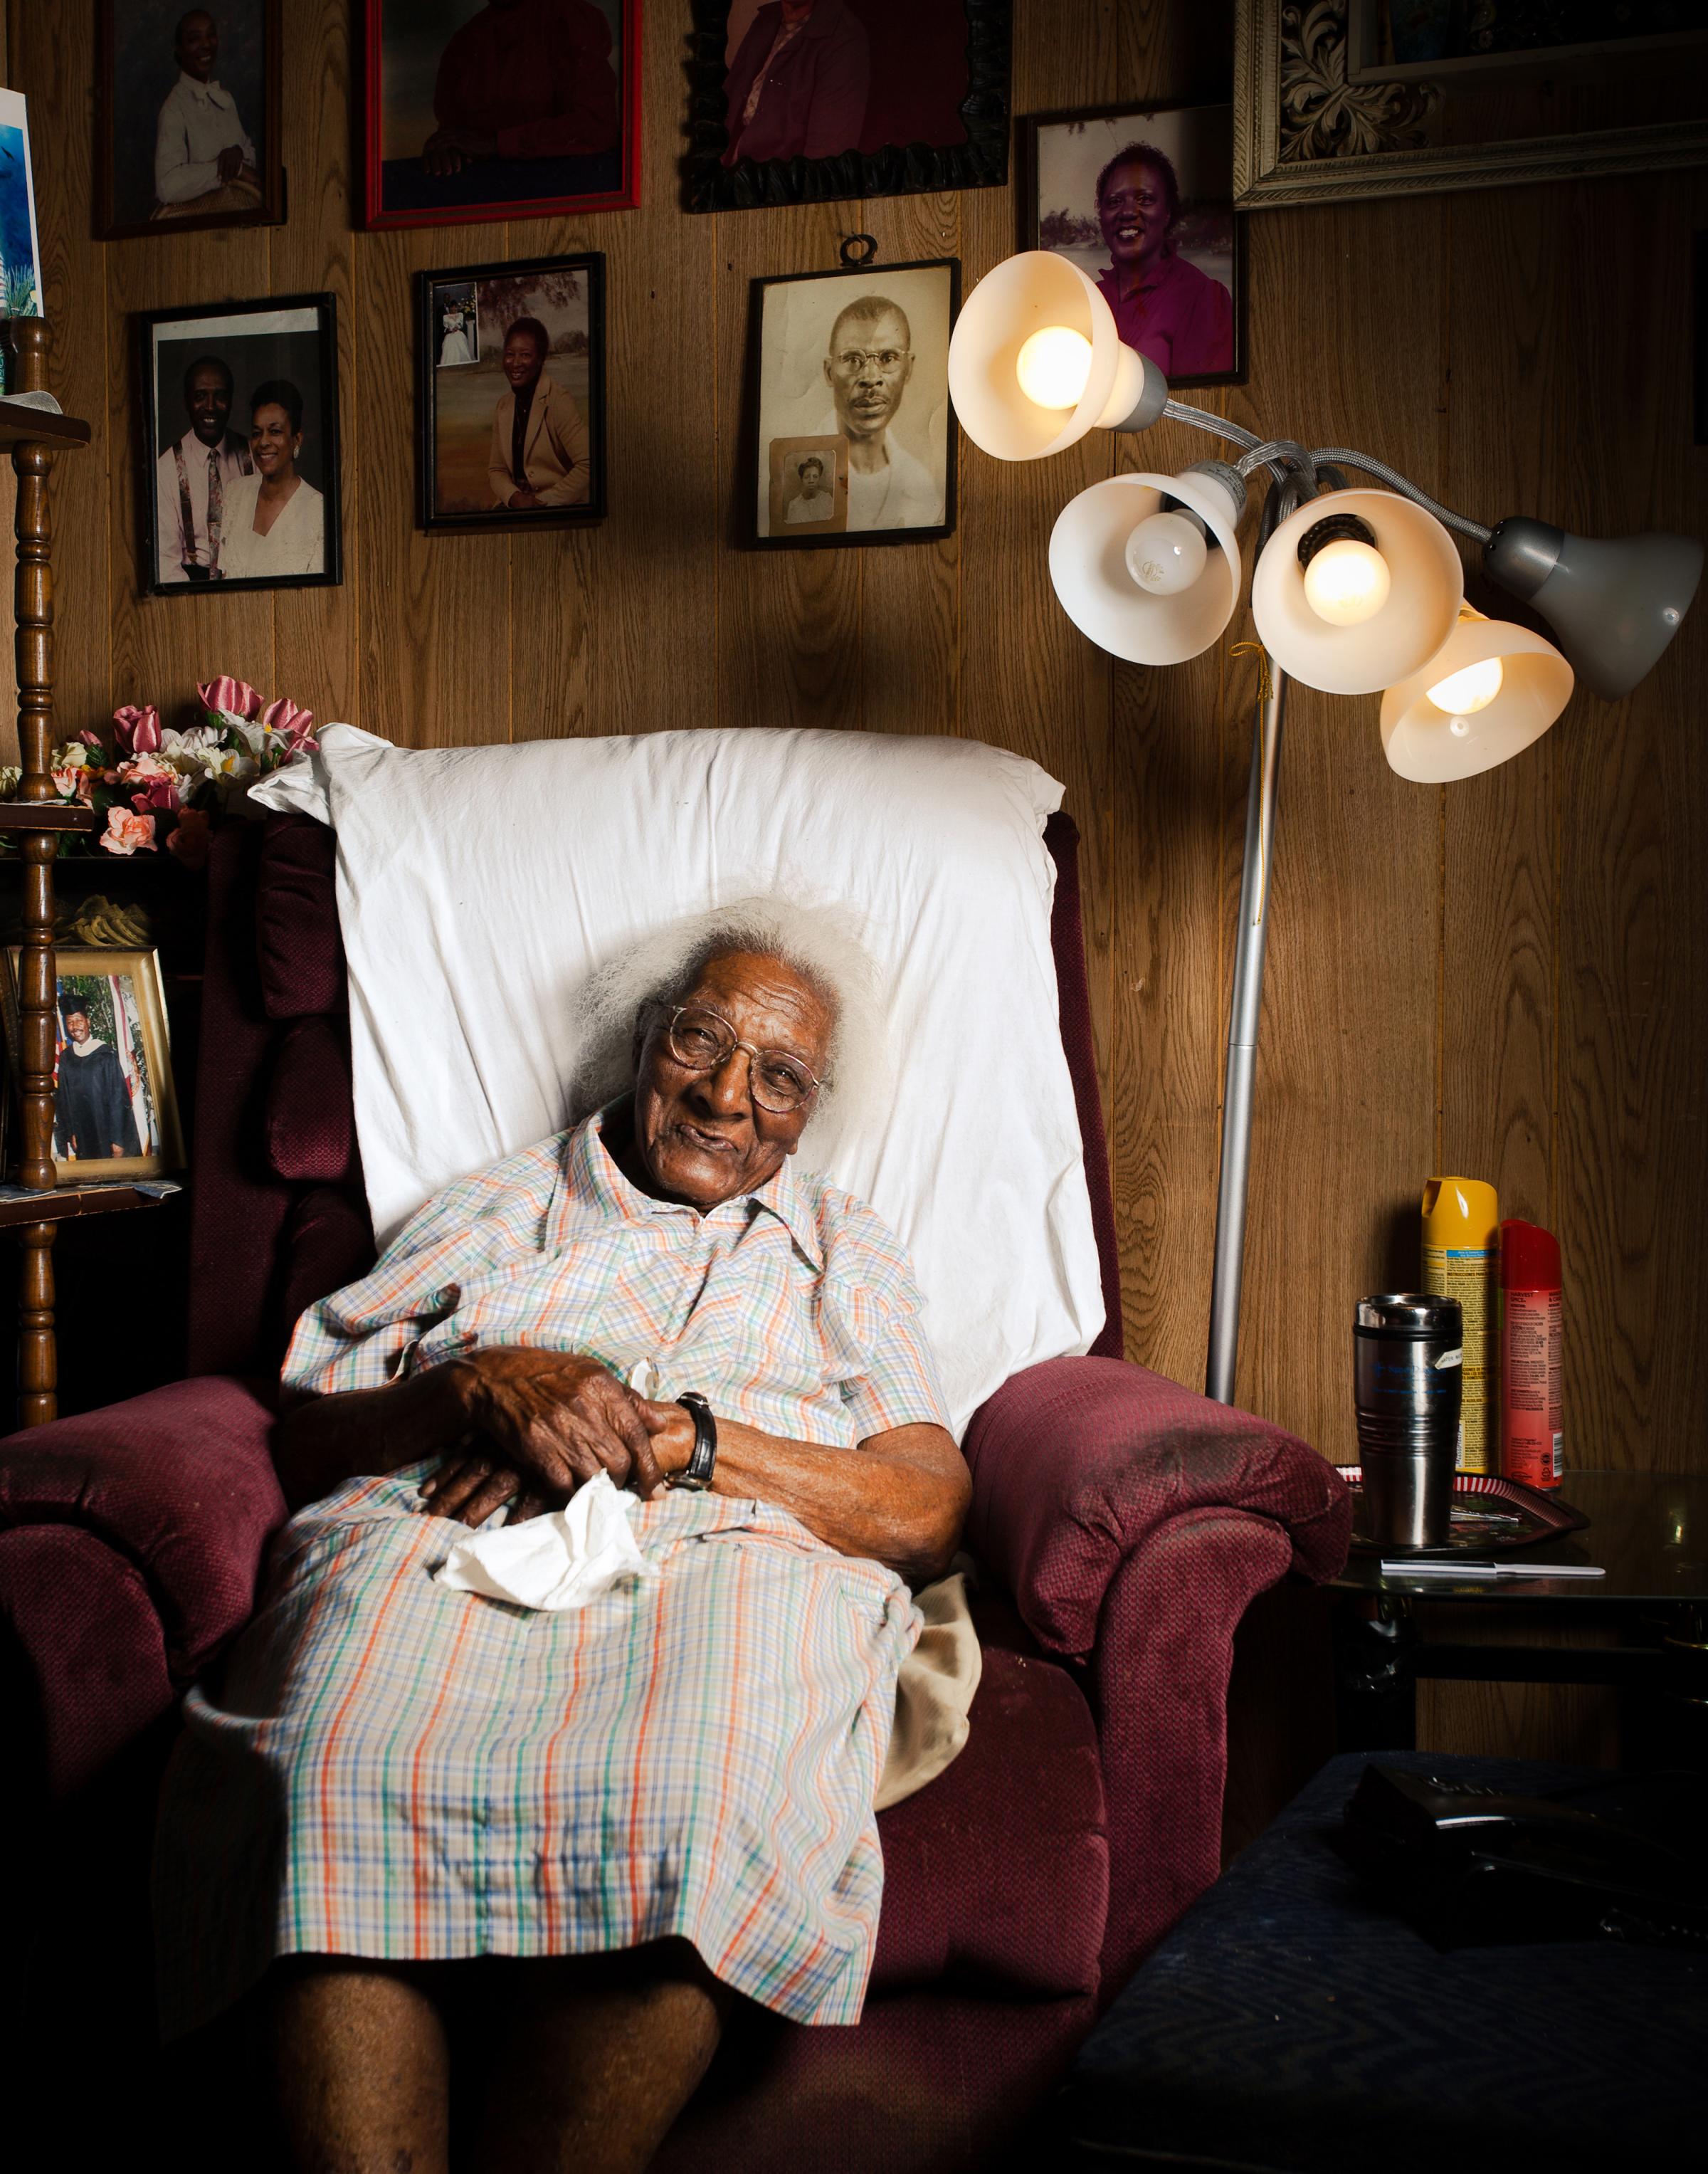 Born September 8, 1900, Blanch Arrington Cobb celebrated her 110th birthday in 2010. She lives with her daughter on the Northside in Jacksonville, FL.